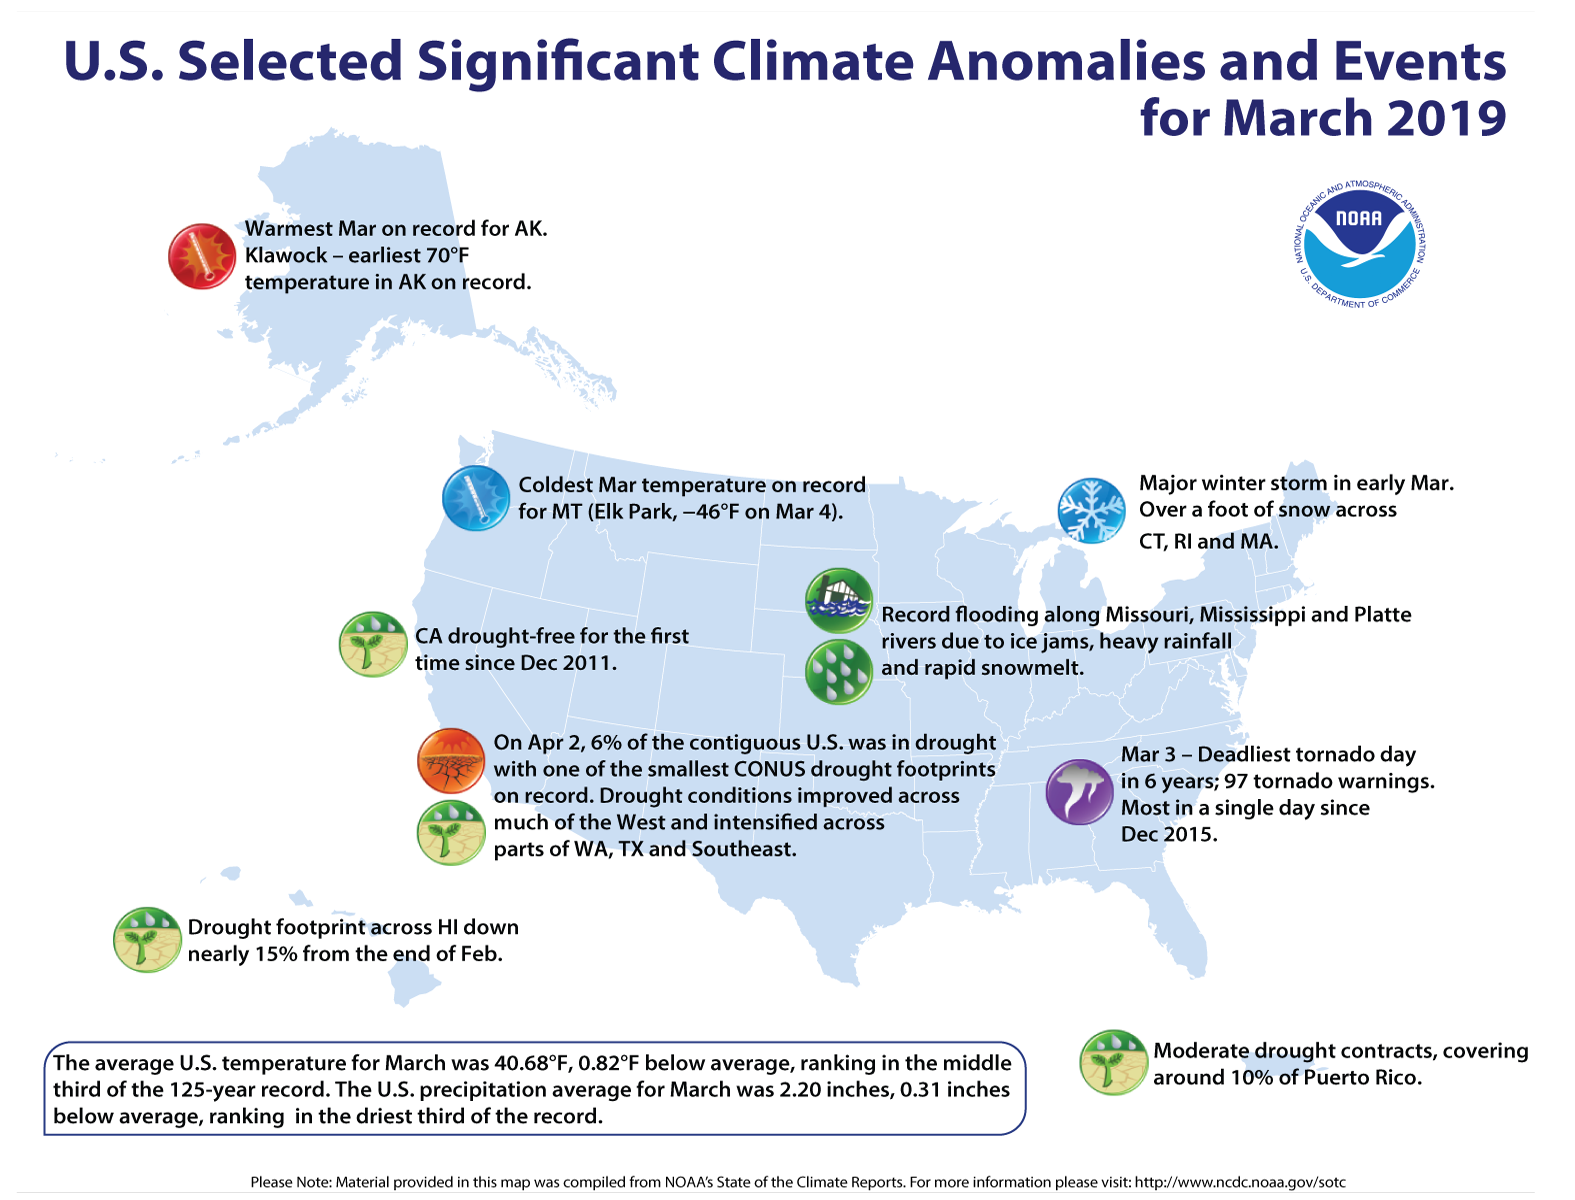 An annotated map of the United States showing notable climate events that occurred across the country in March 2019. For details, see the bulleted list below in the story and online at http://bit.ly/USClimate201903.